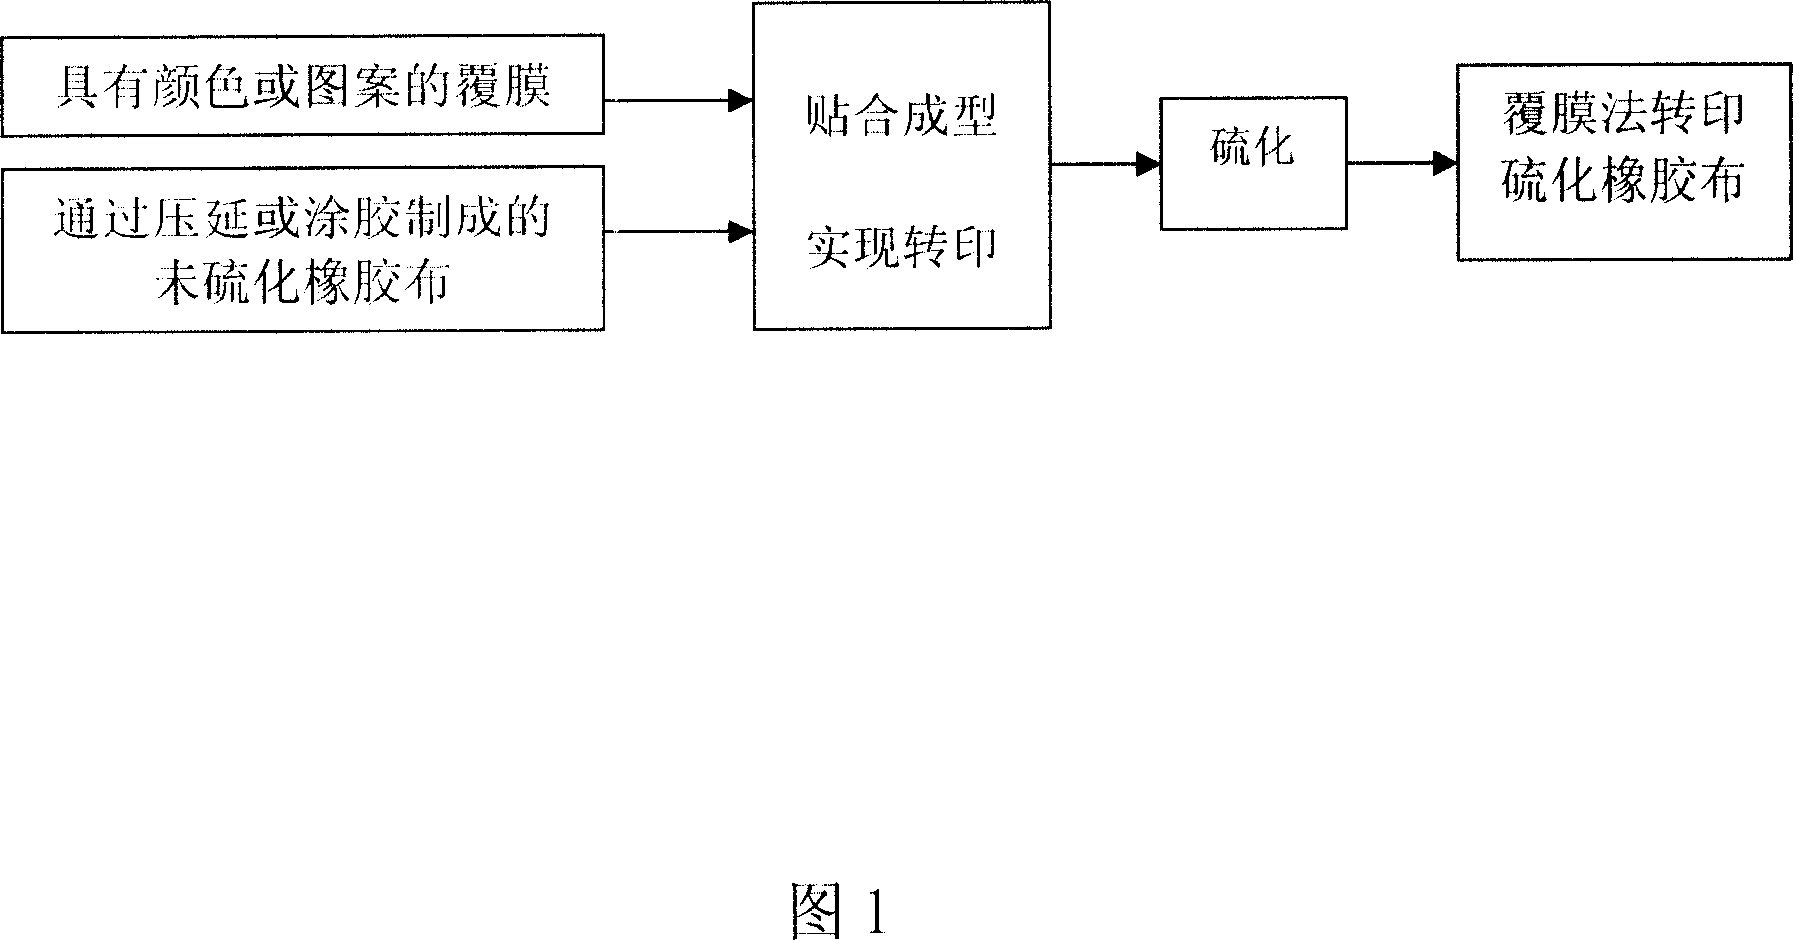 Method for producing colorful rubber cloth